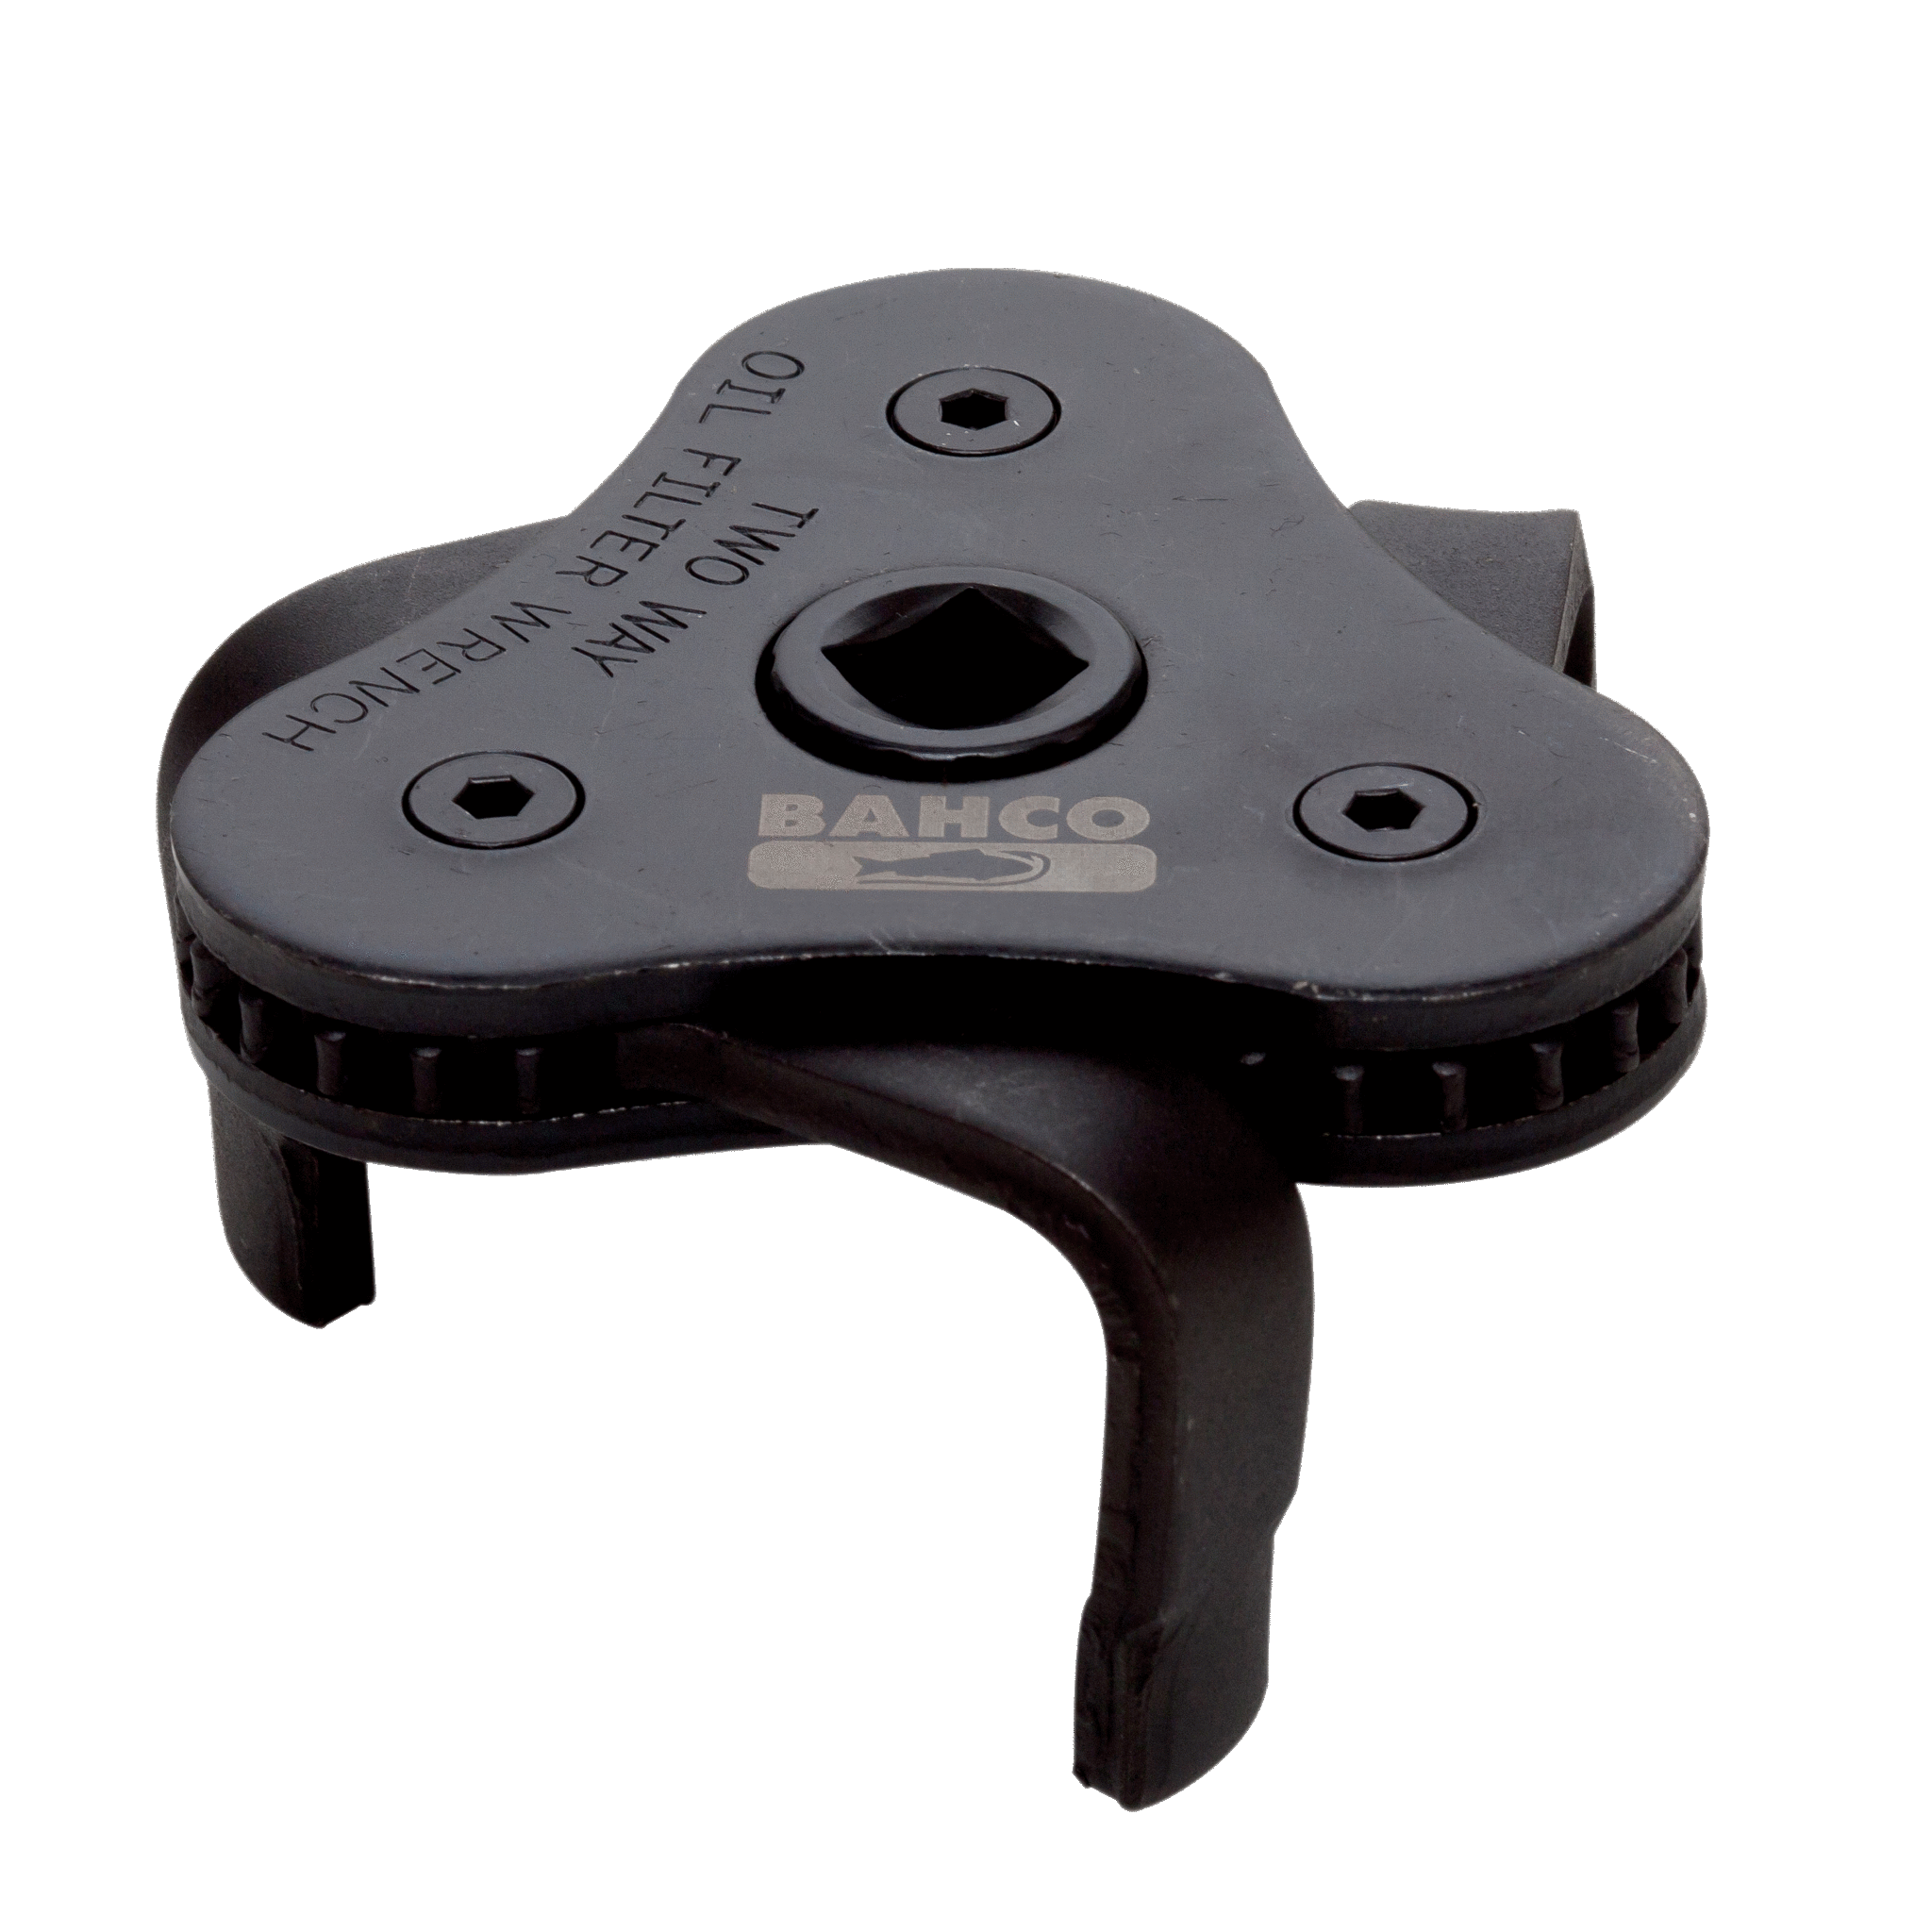 BAHCO 3-jaw oil filter wrench